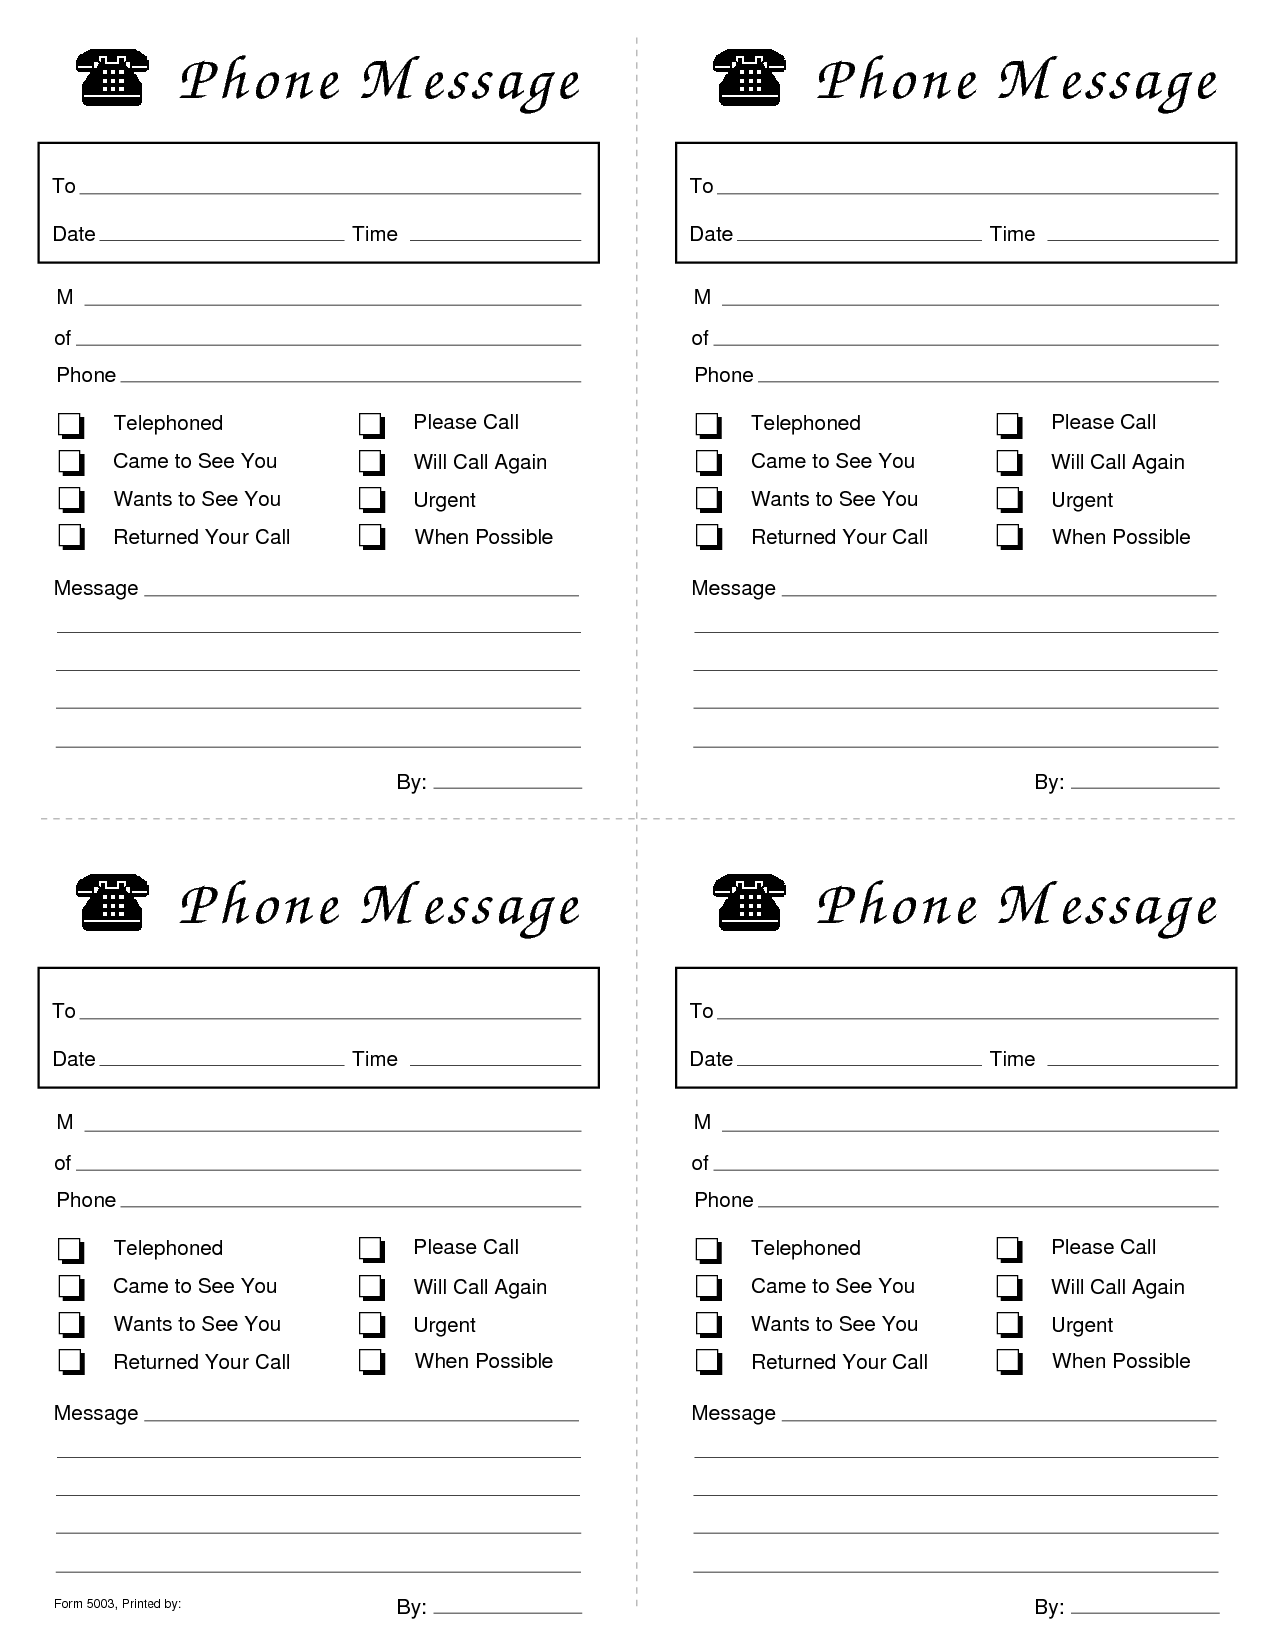 7 Best Images of Phone Message Sheet Printable Printable Phone